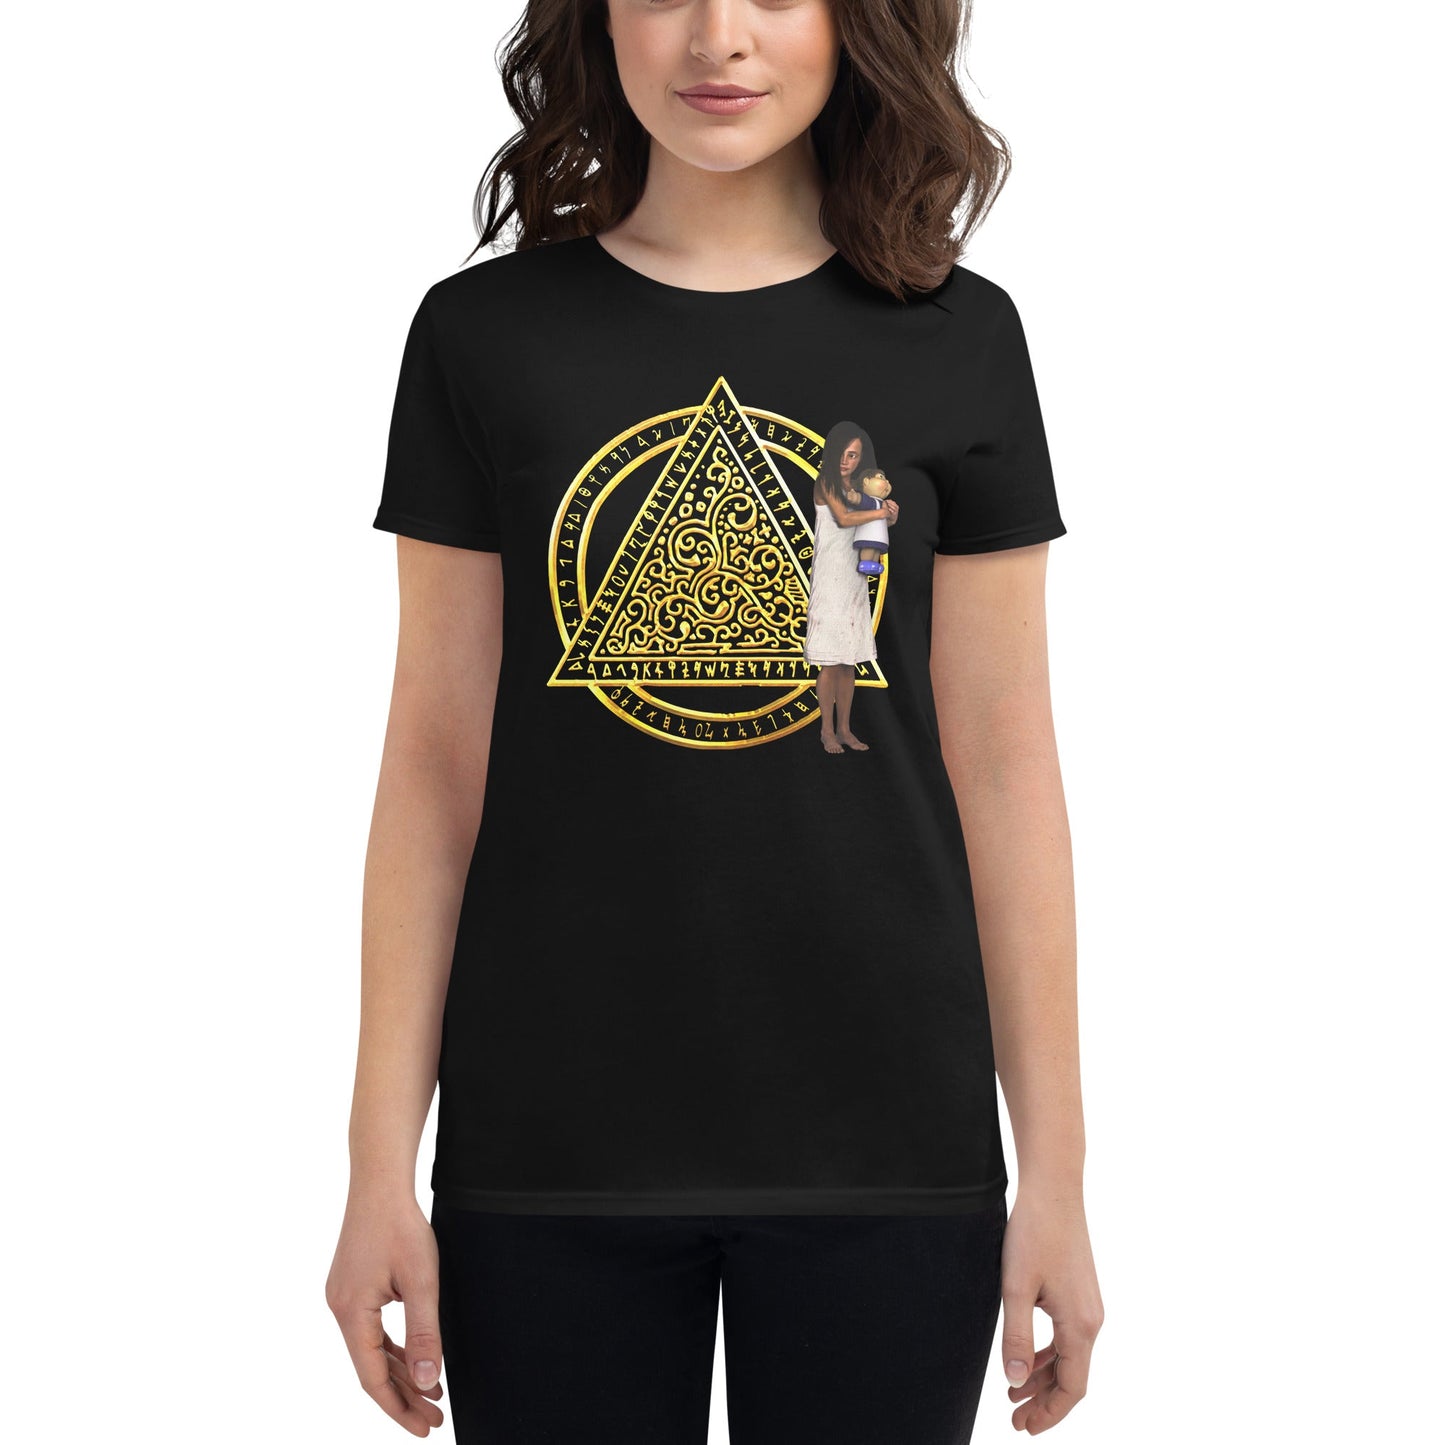 Women's Graphic T-Shirt | The Last Rite | Bethany - Spectral Ink Shop - Shirts & Tops -4971755_4902